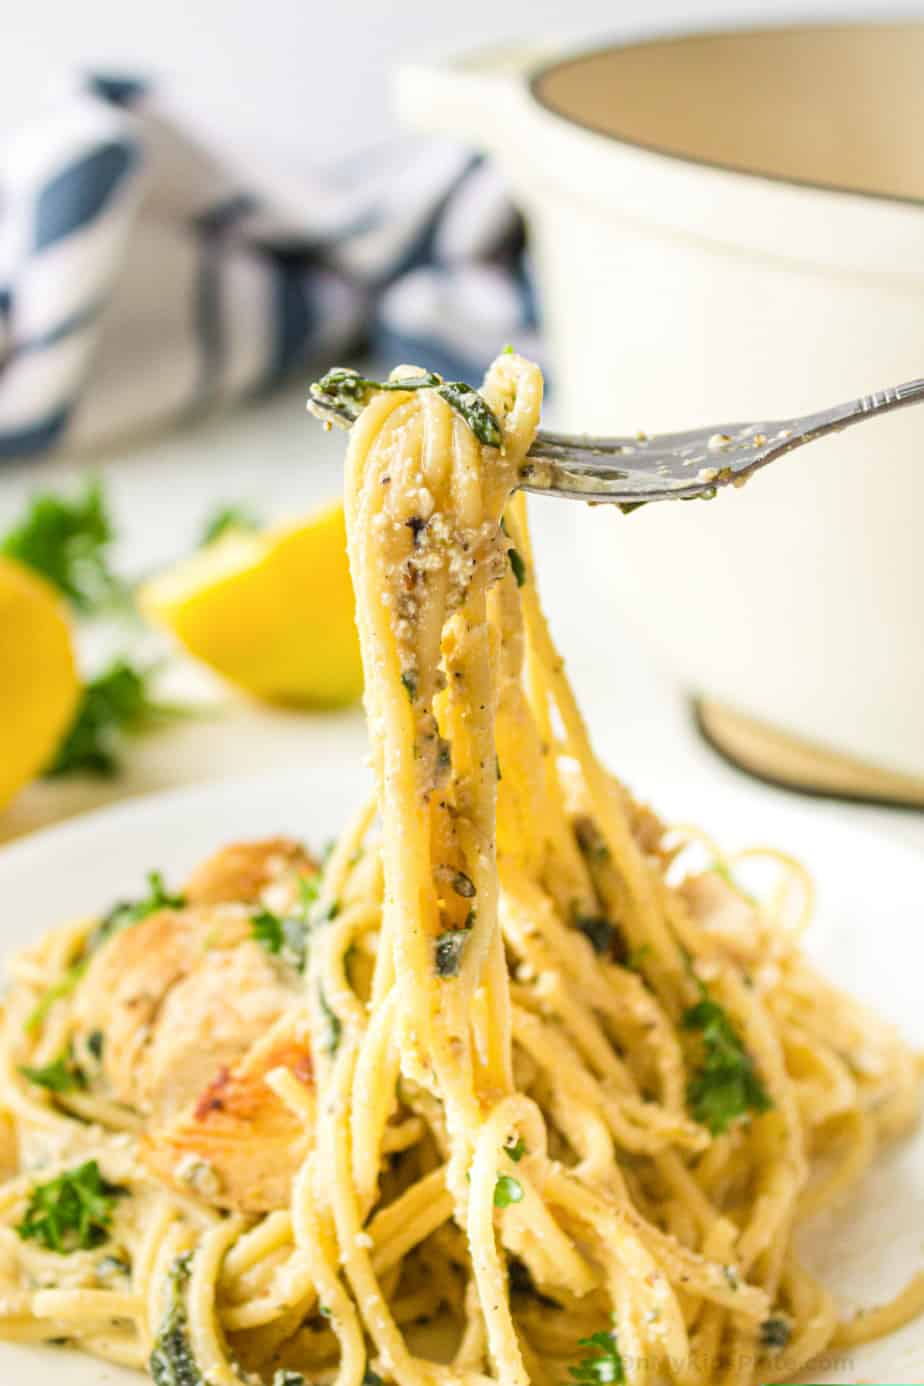 Pasta with chicken, cheese and herbs being pulled by a fork from a plate with lemon in the background